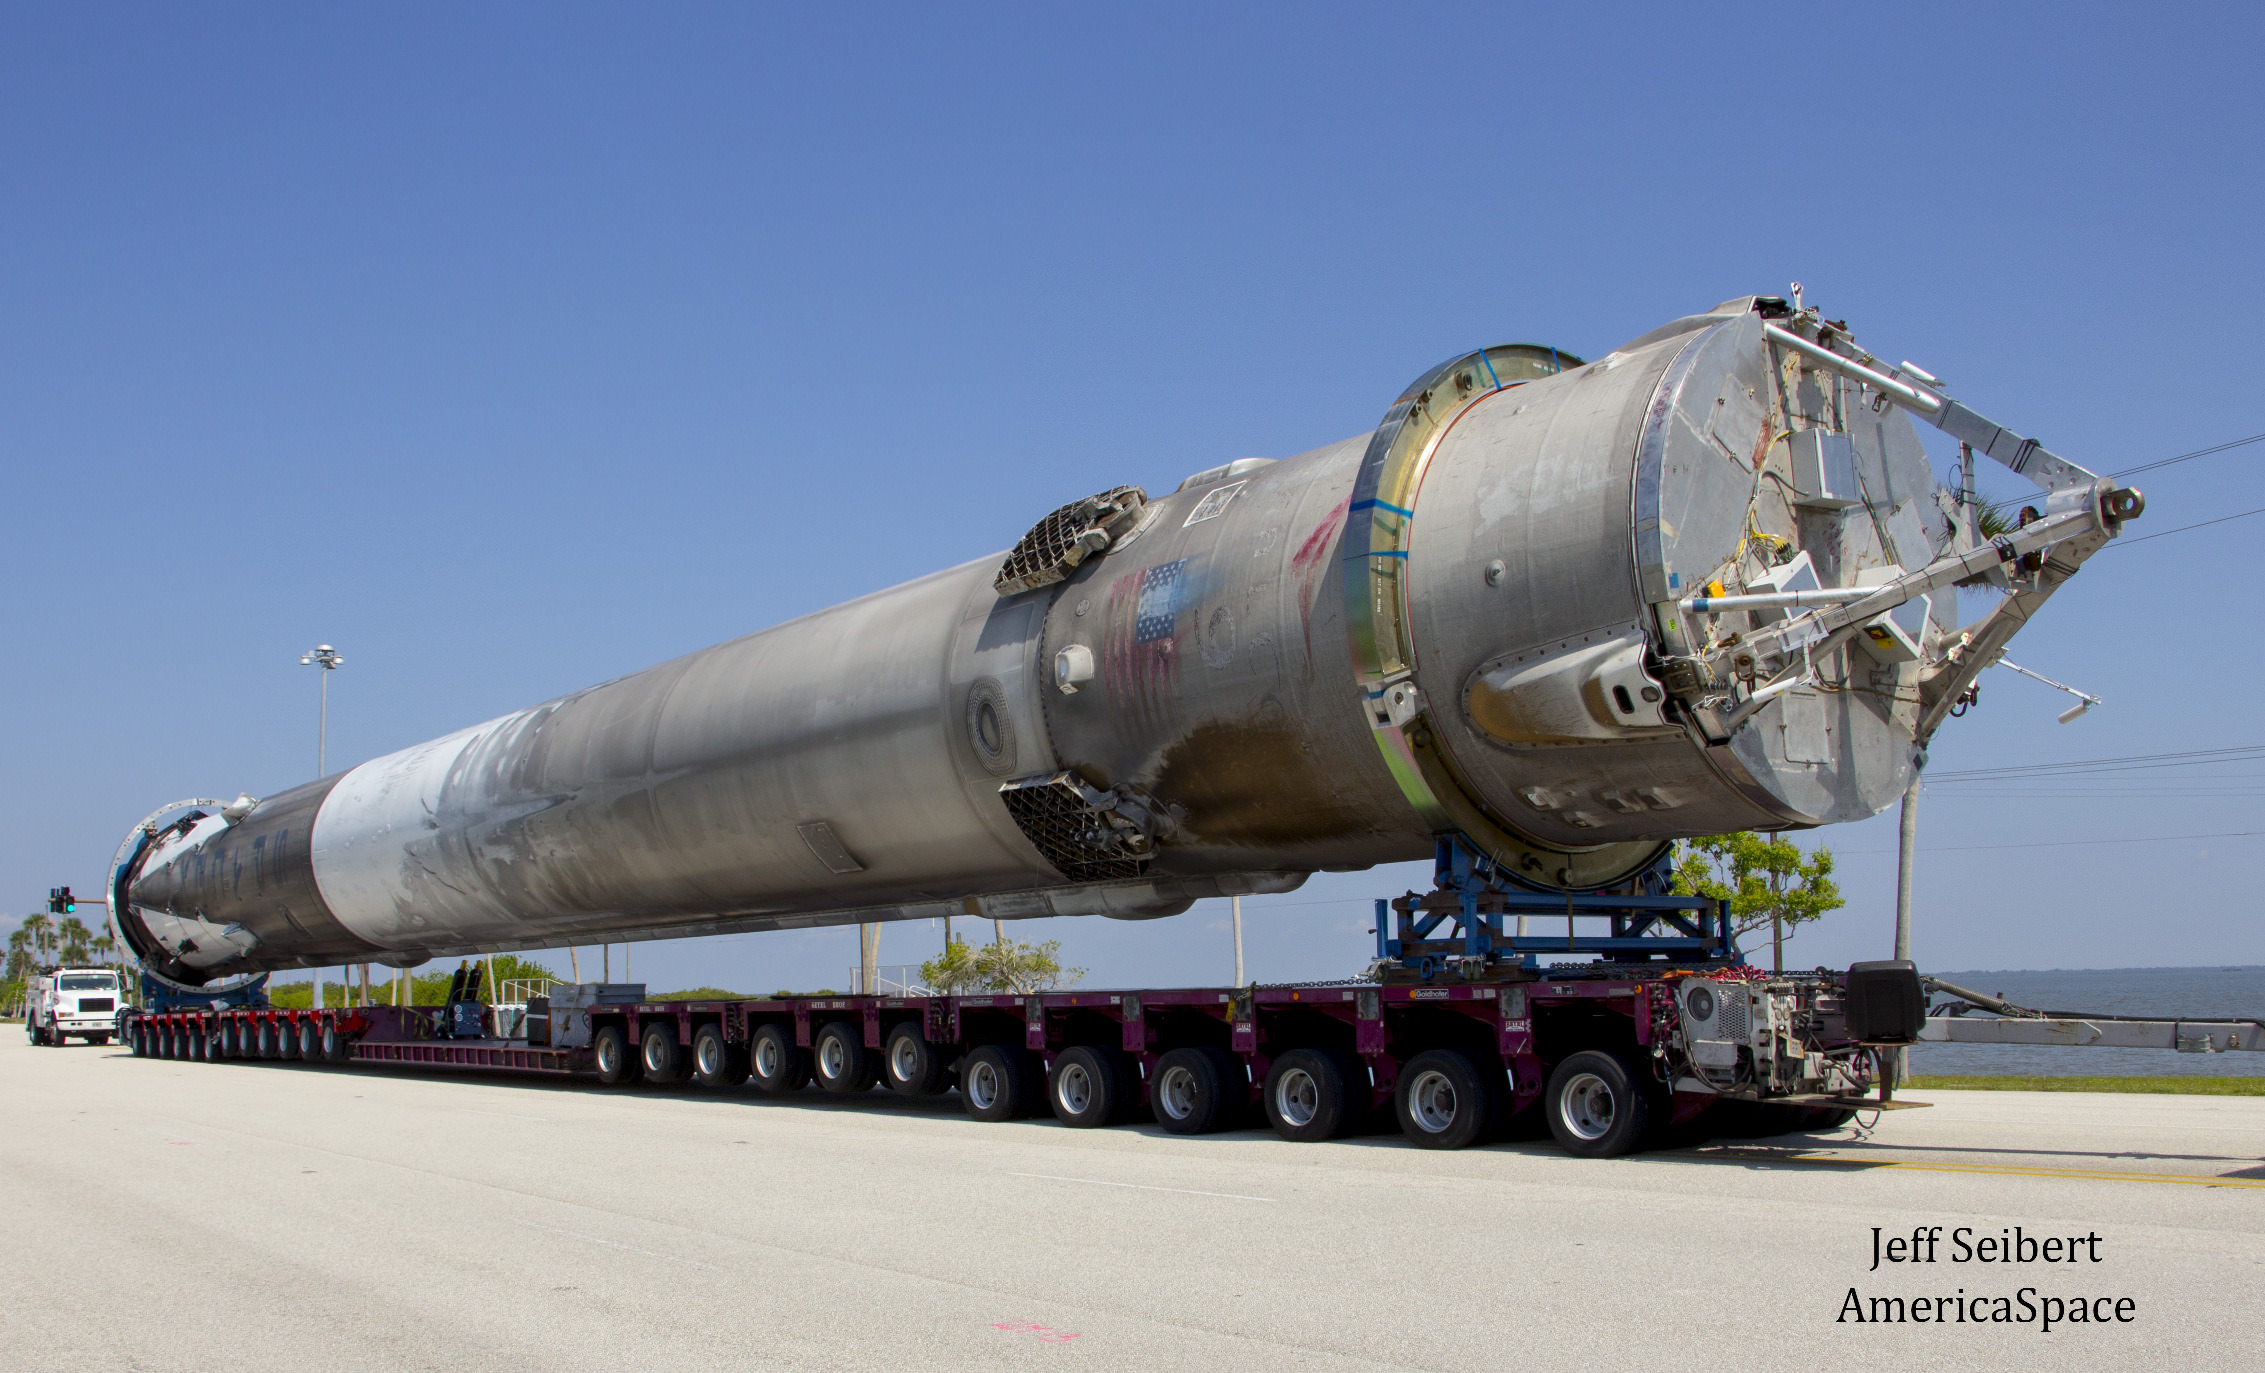 First stage booster from SpaceX JCSAT-14 launch was transported horizontally to SpaceX hangar at pad 39A at the Kennedy Space Center, Florida. Credit: Jeff Seibert/AmericaSpace